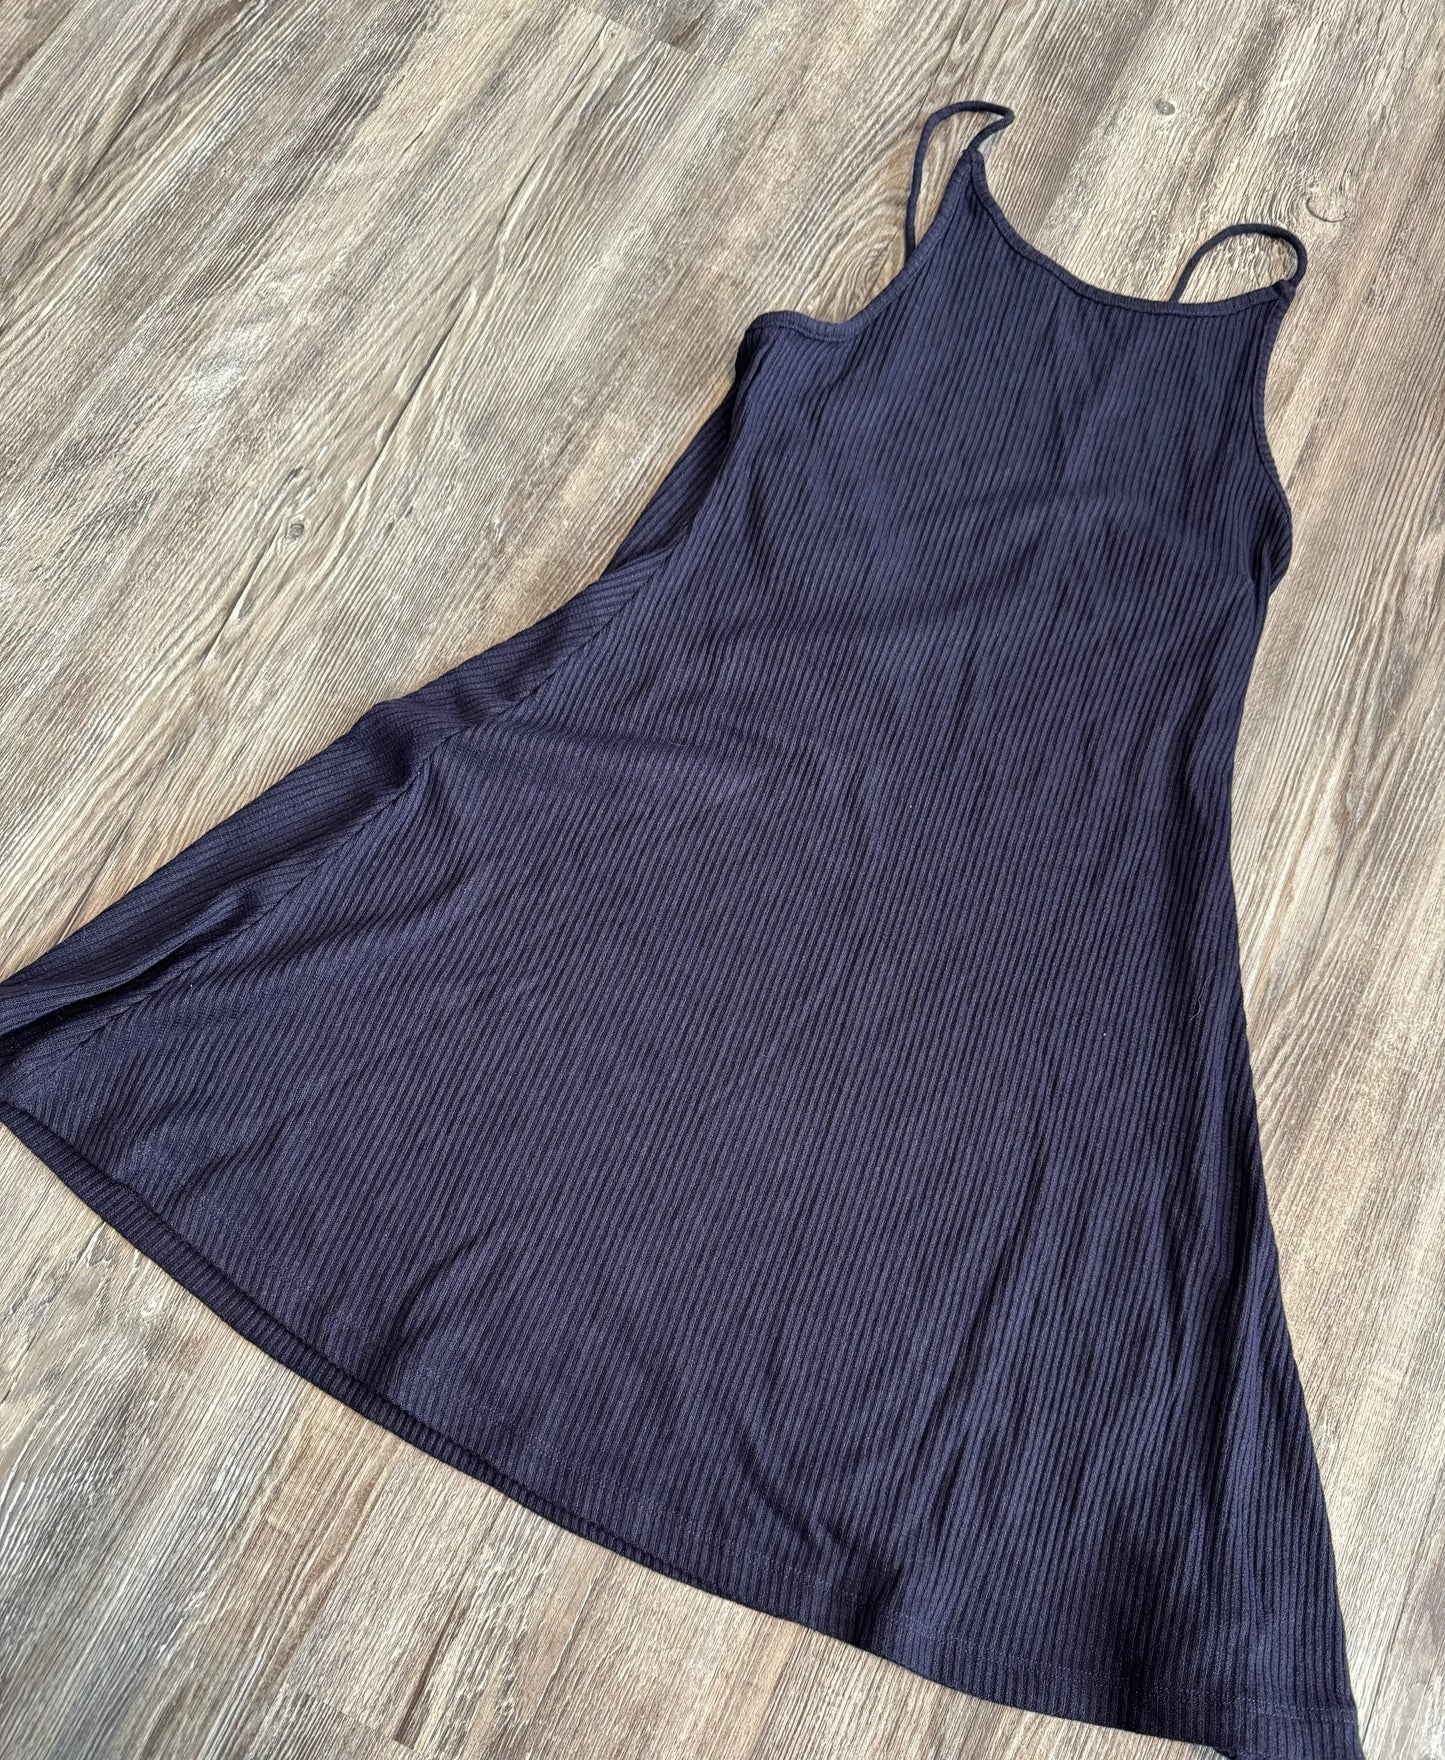 Dress Casual Short By Topshop  Size: S